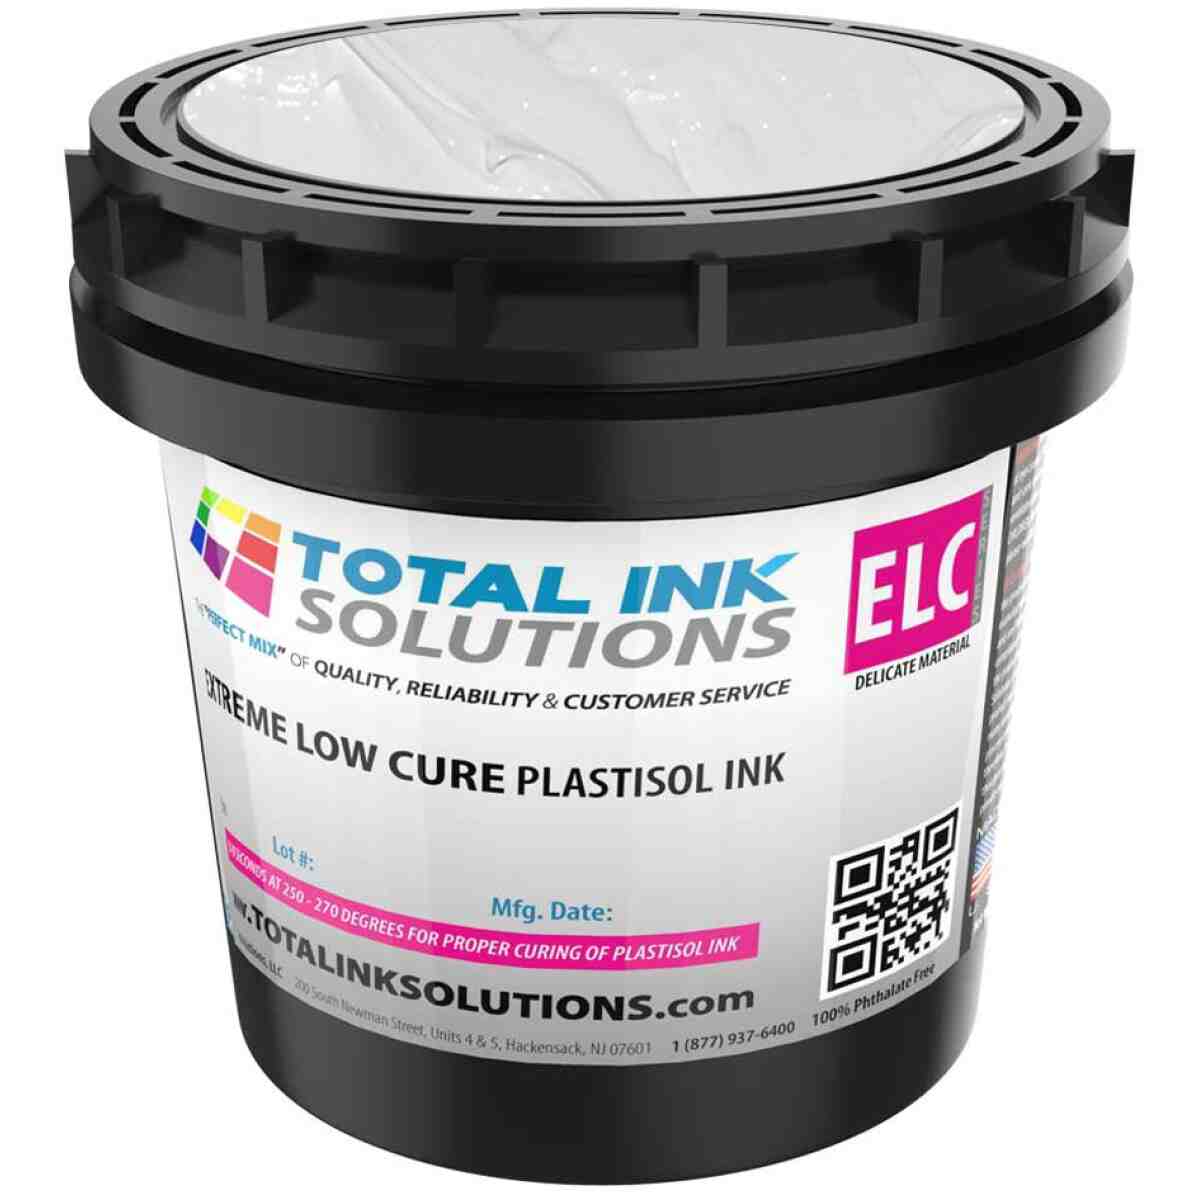 Extreme 270 Degree Low Cure Plastisol Ink Series - Pint TOTAL INK SOLUTIONS®